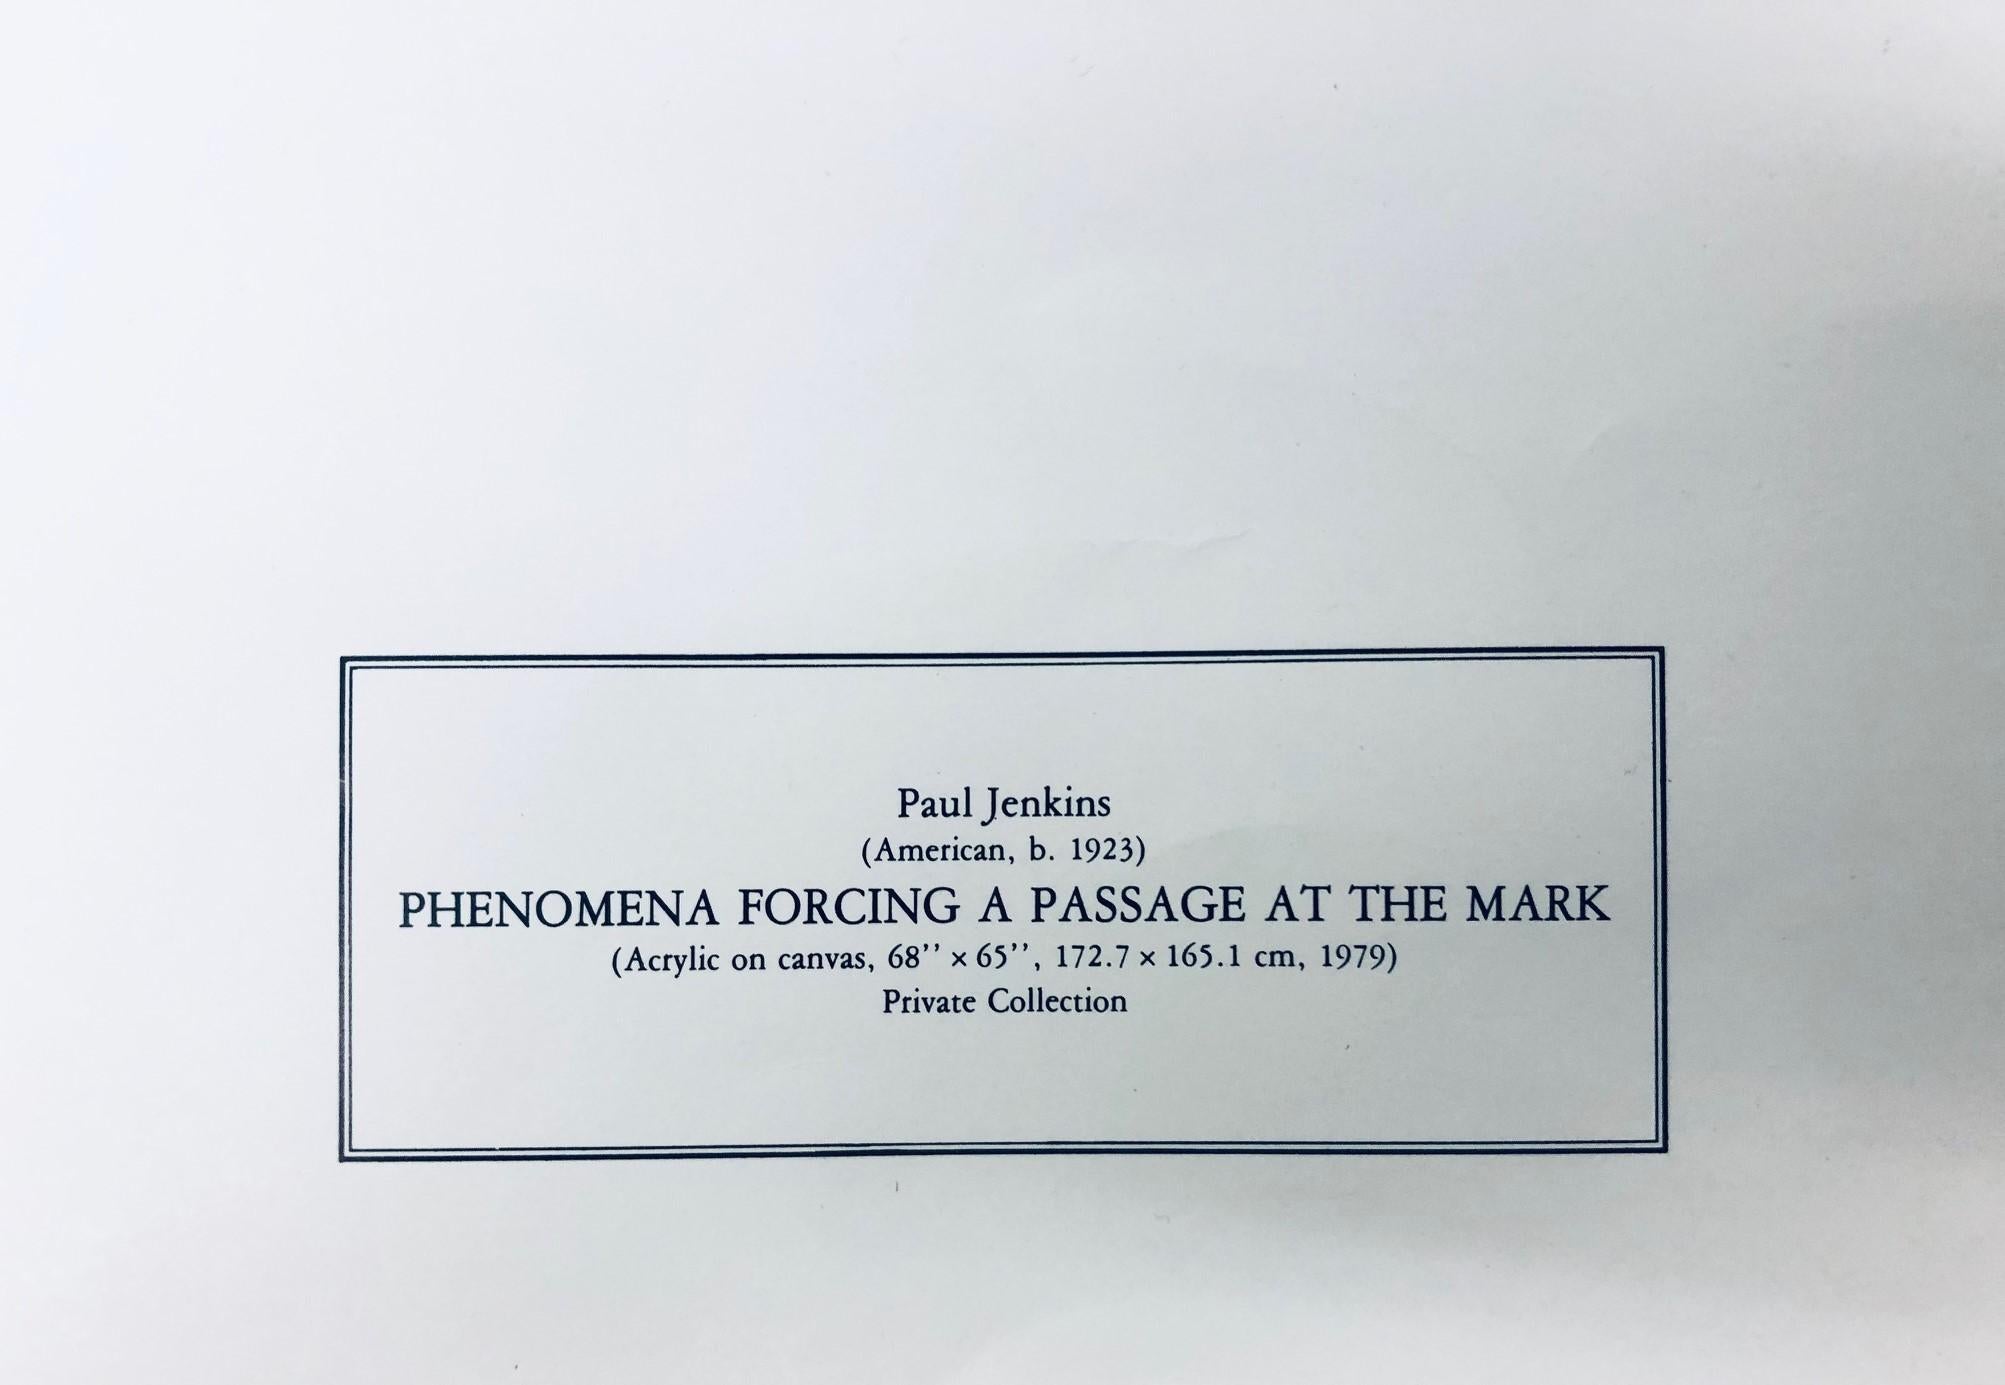 Phenomena Forcing A Passage At The Mark-Poster, New York Graphic Society - Print by Paul Jenkins